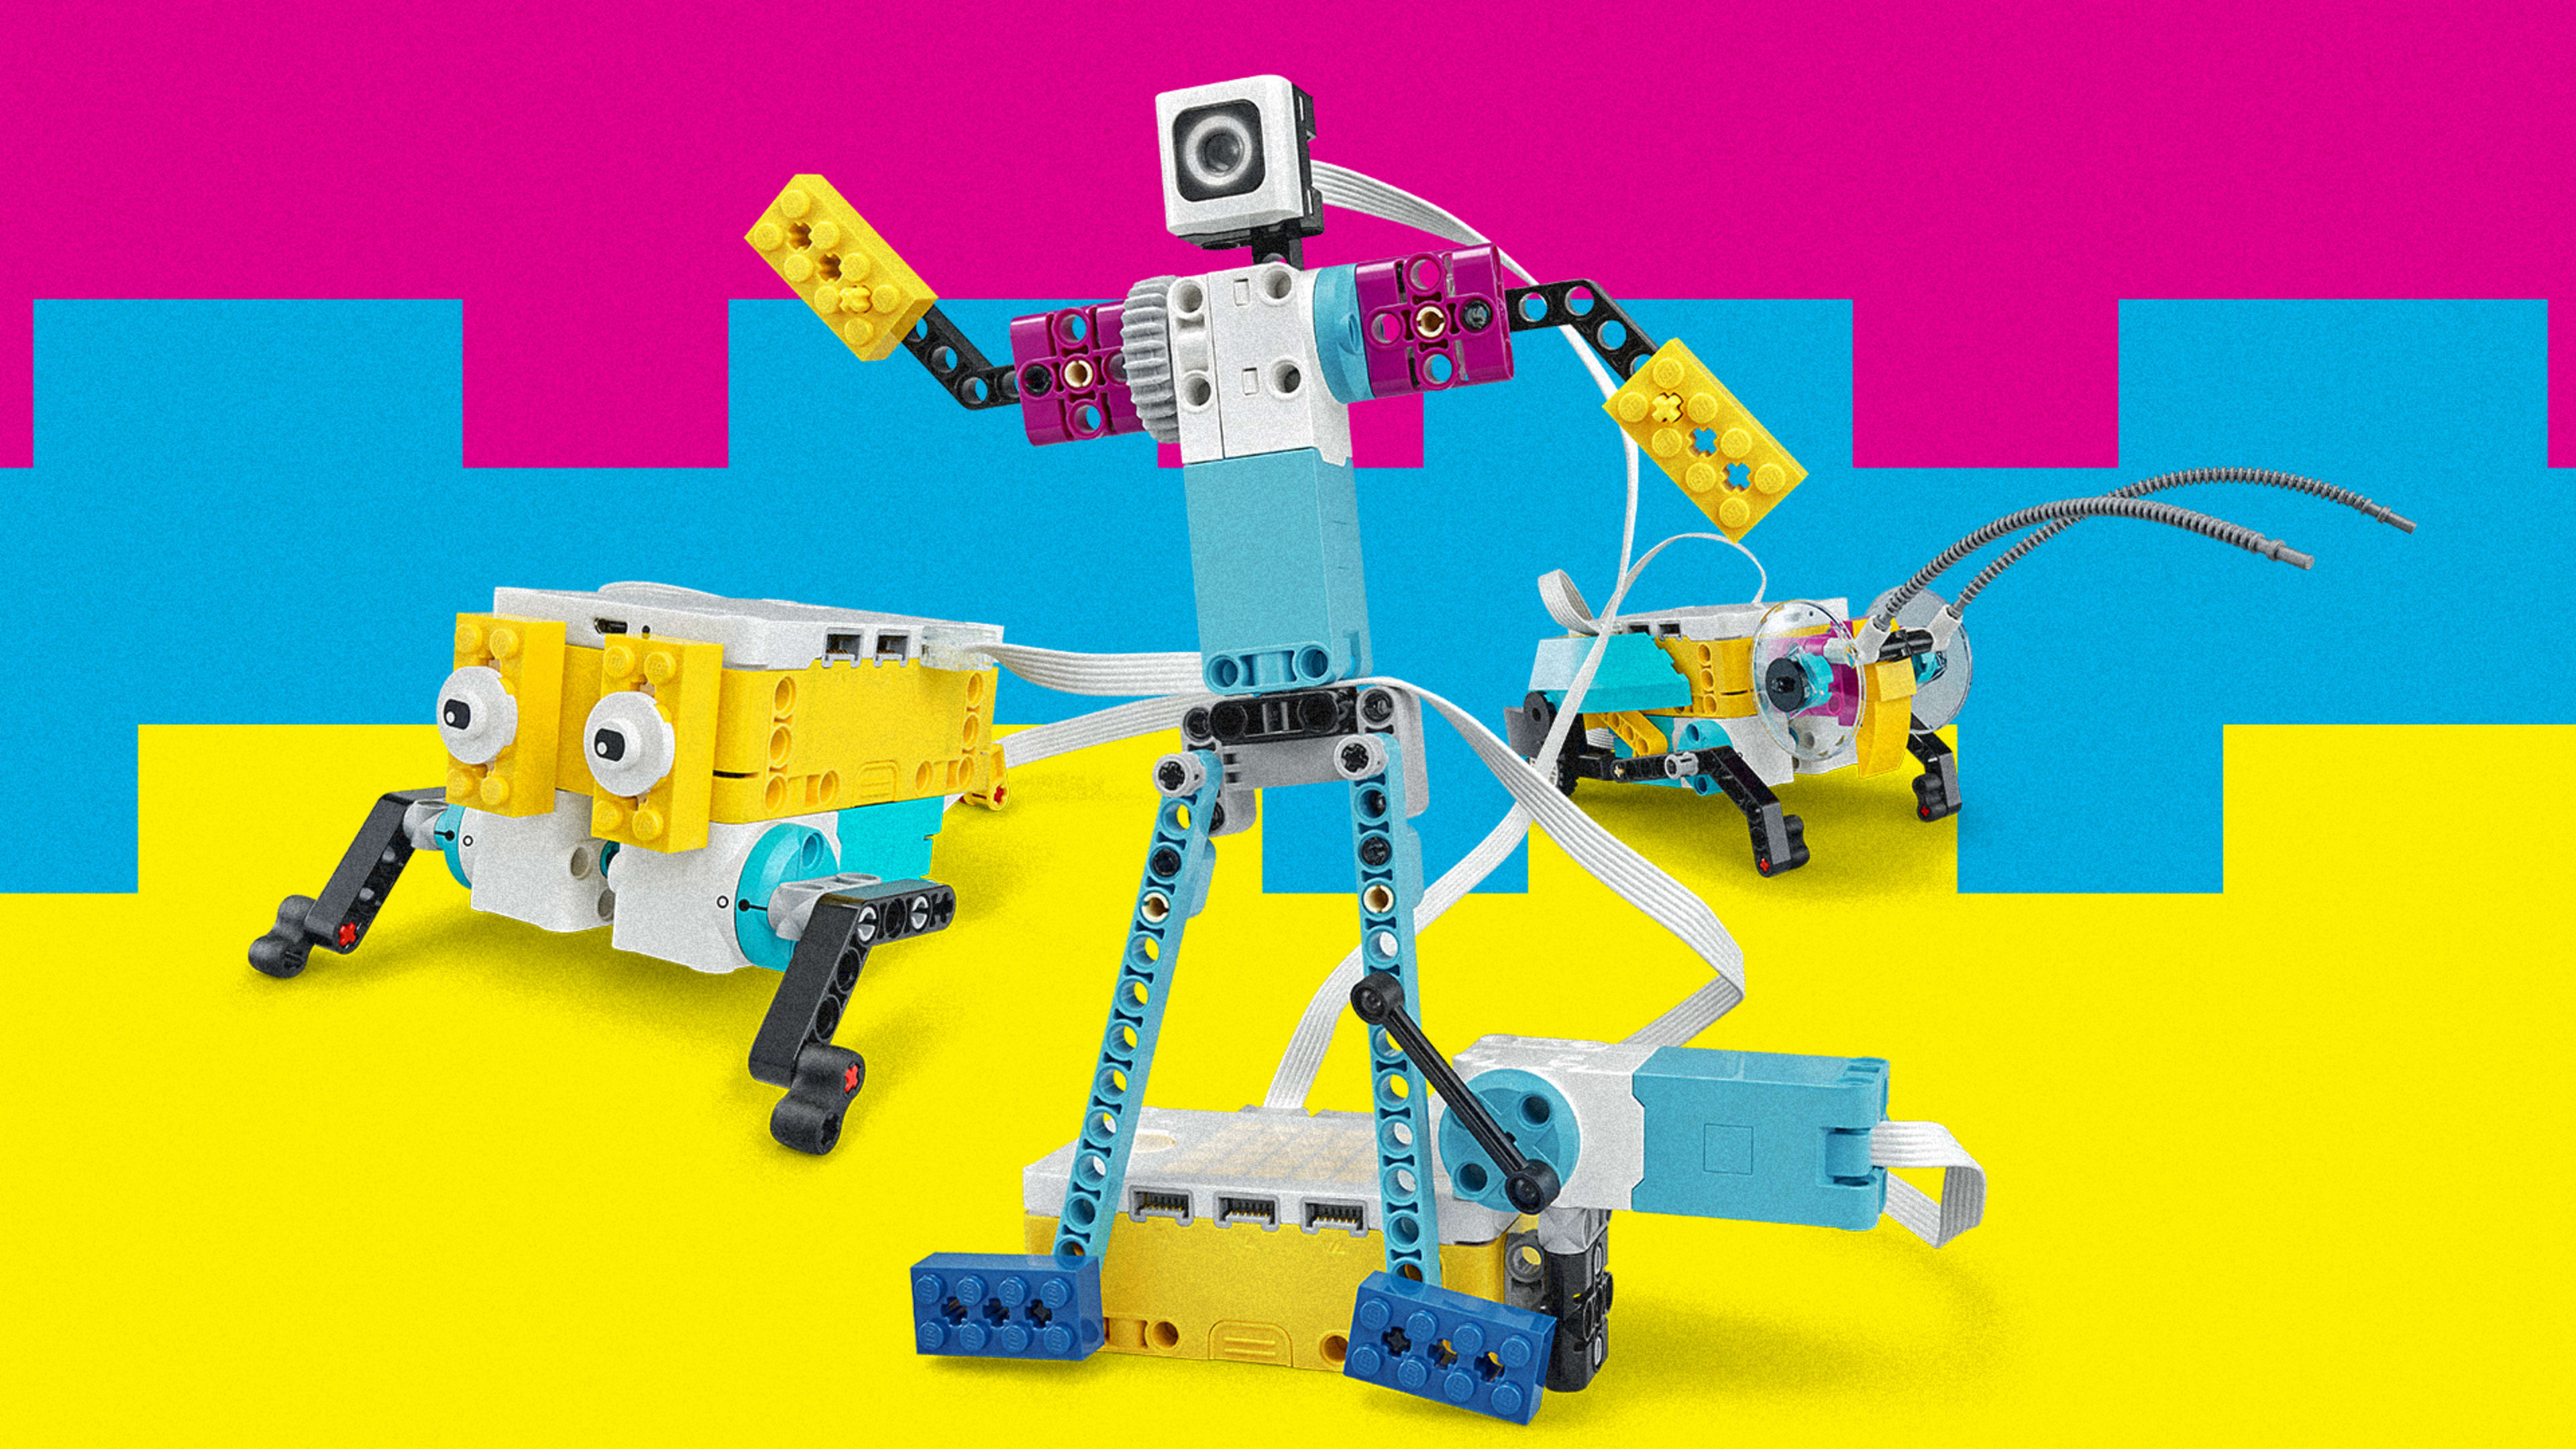 Lego Spike Prime is the coolest way to learn engineering since 1998